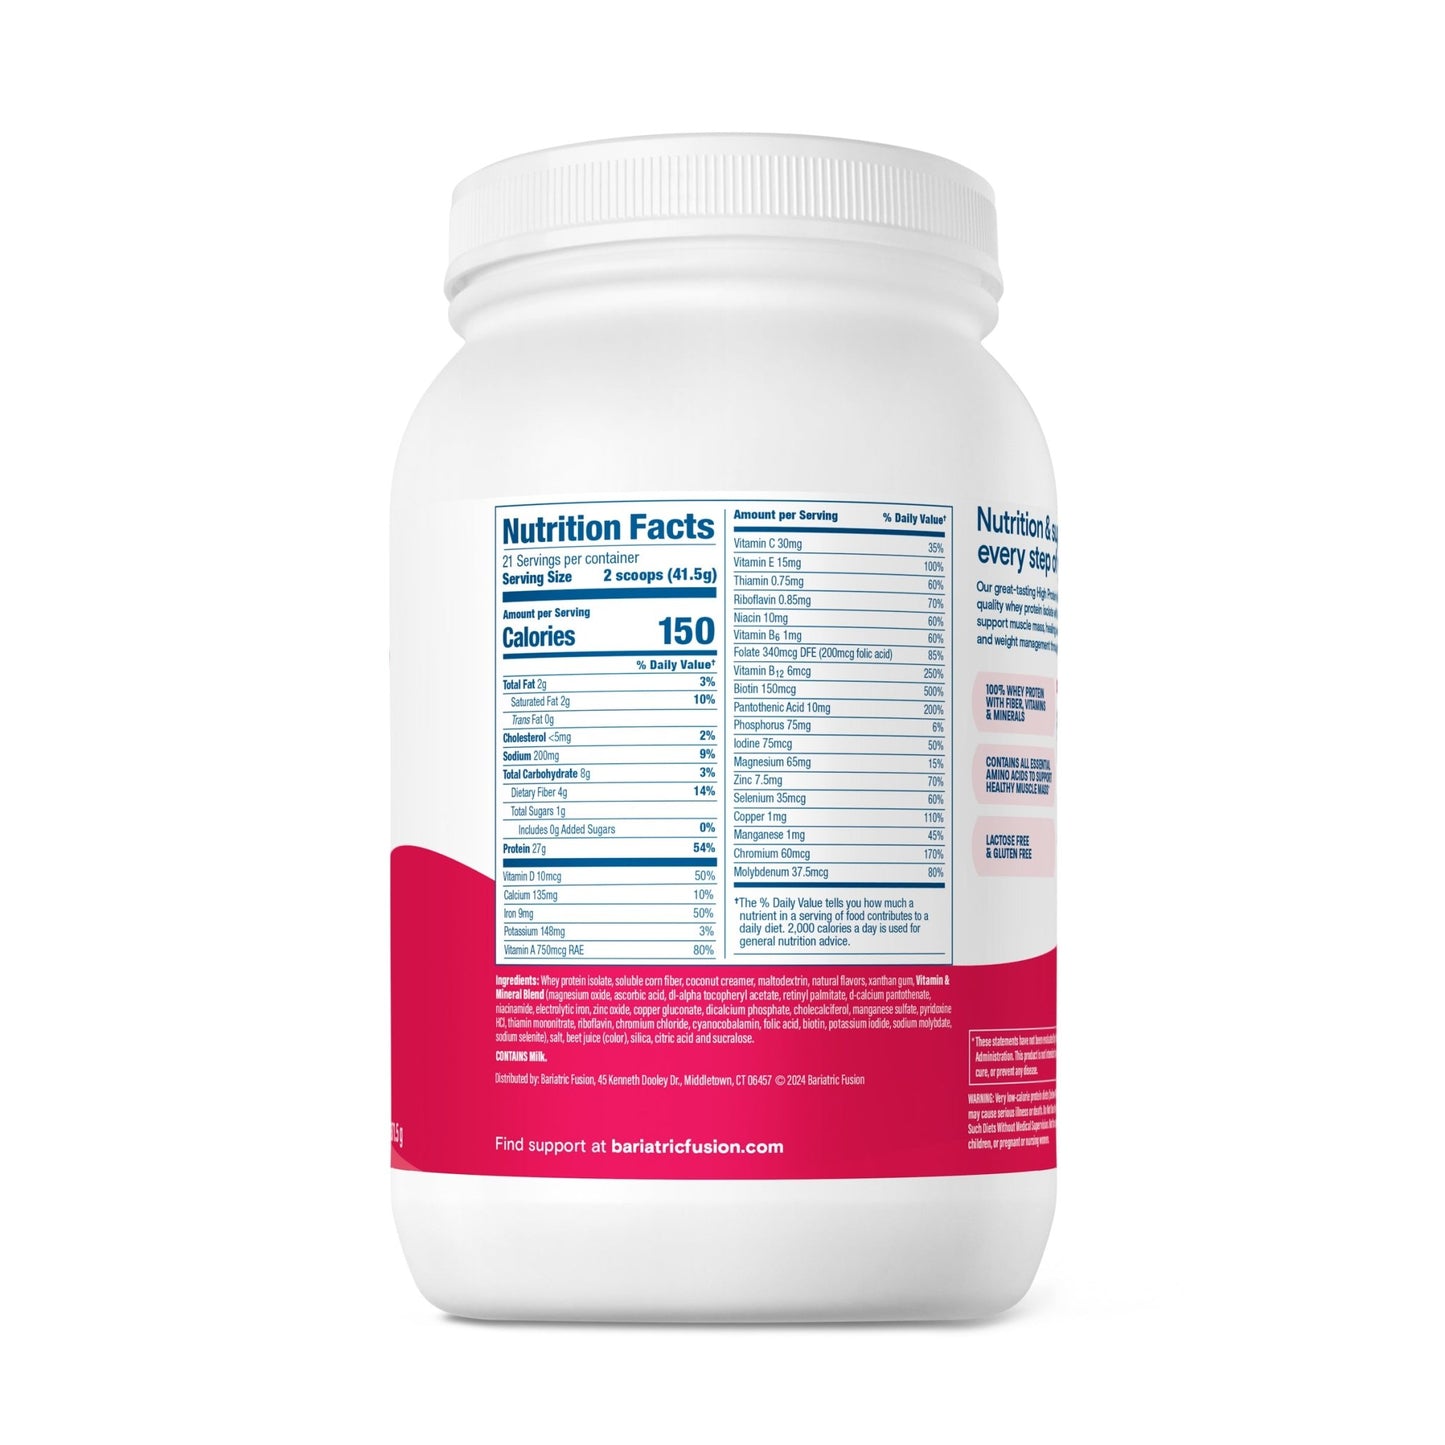 Bariatric Fusion Strawberry High Protein Meal Replacement ingredients.